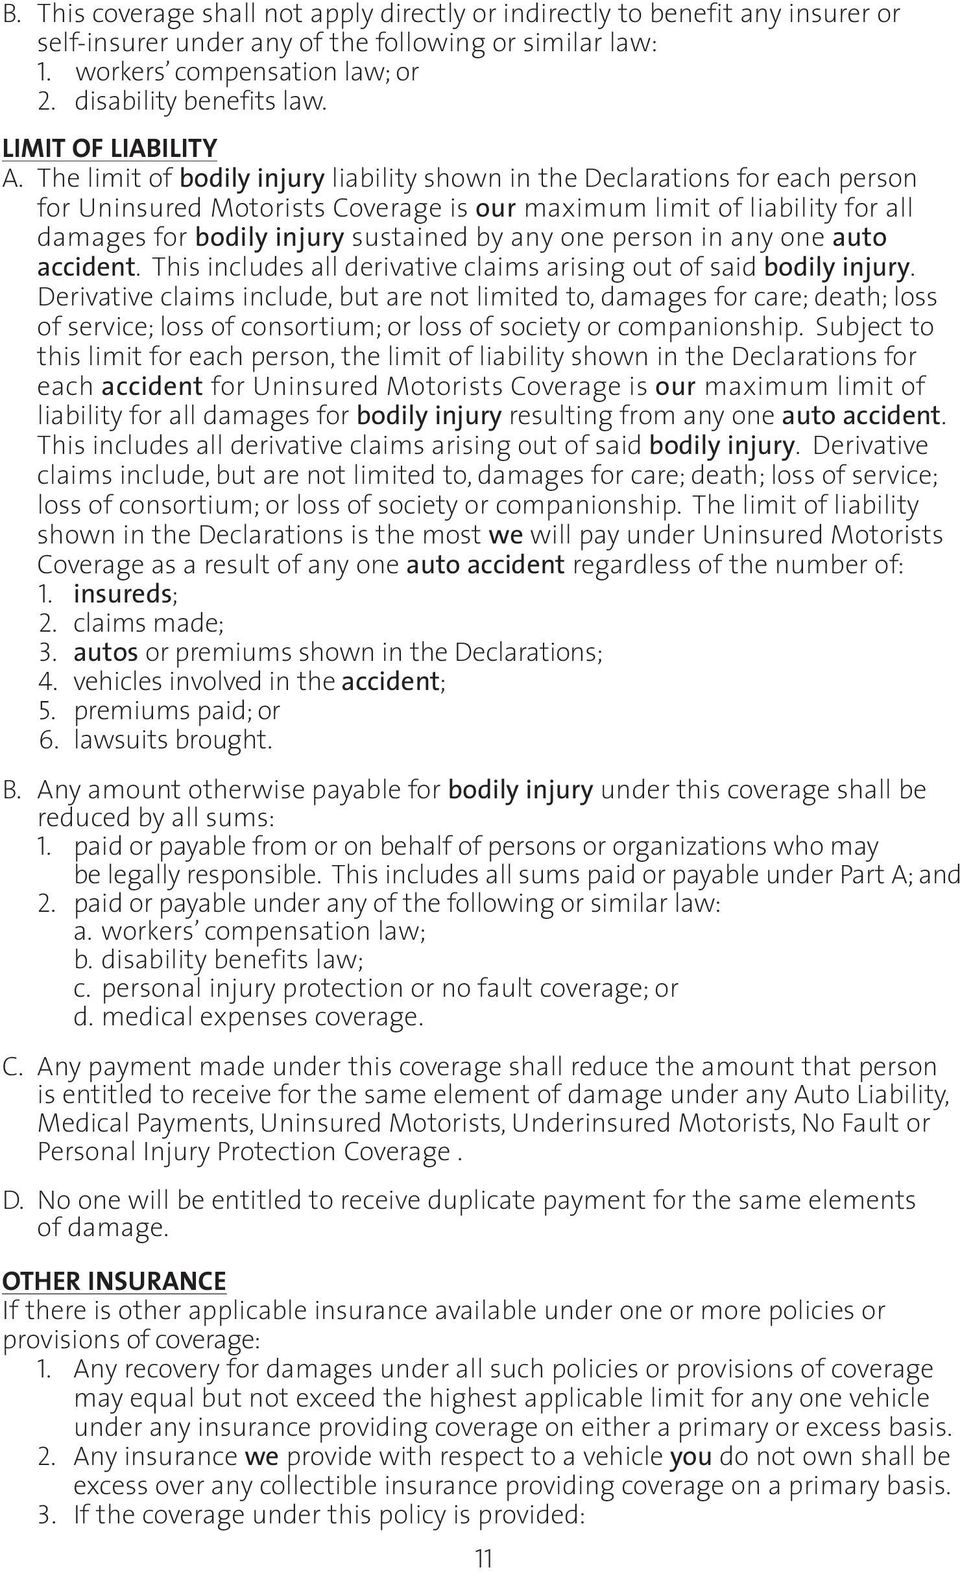 The limit of bodily injury liability shown in the Declarations for each person for Uninsured Motorists Coverage is our maximum limit of liability for all damages for bodily injury sustained by any